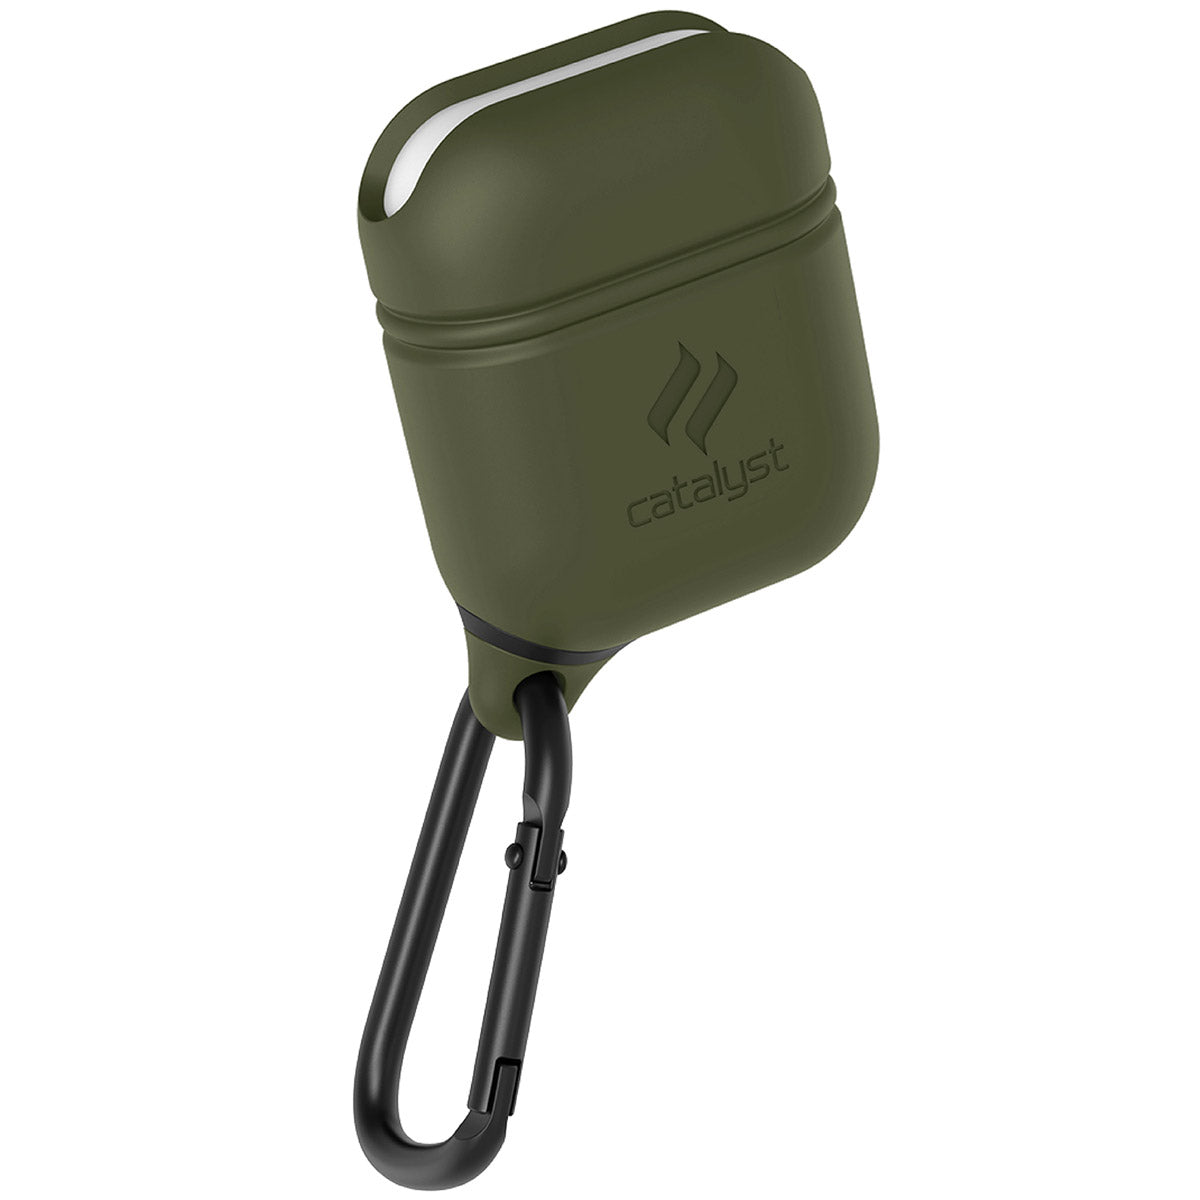 Catalyst airpods gen2/1 waterproof case + carabiner showing the front view of the case in army green colorway